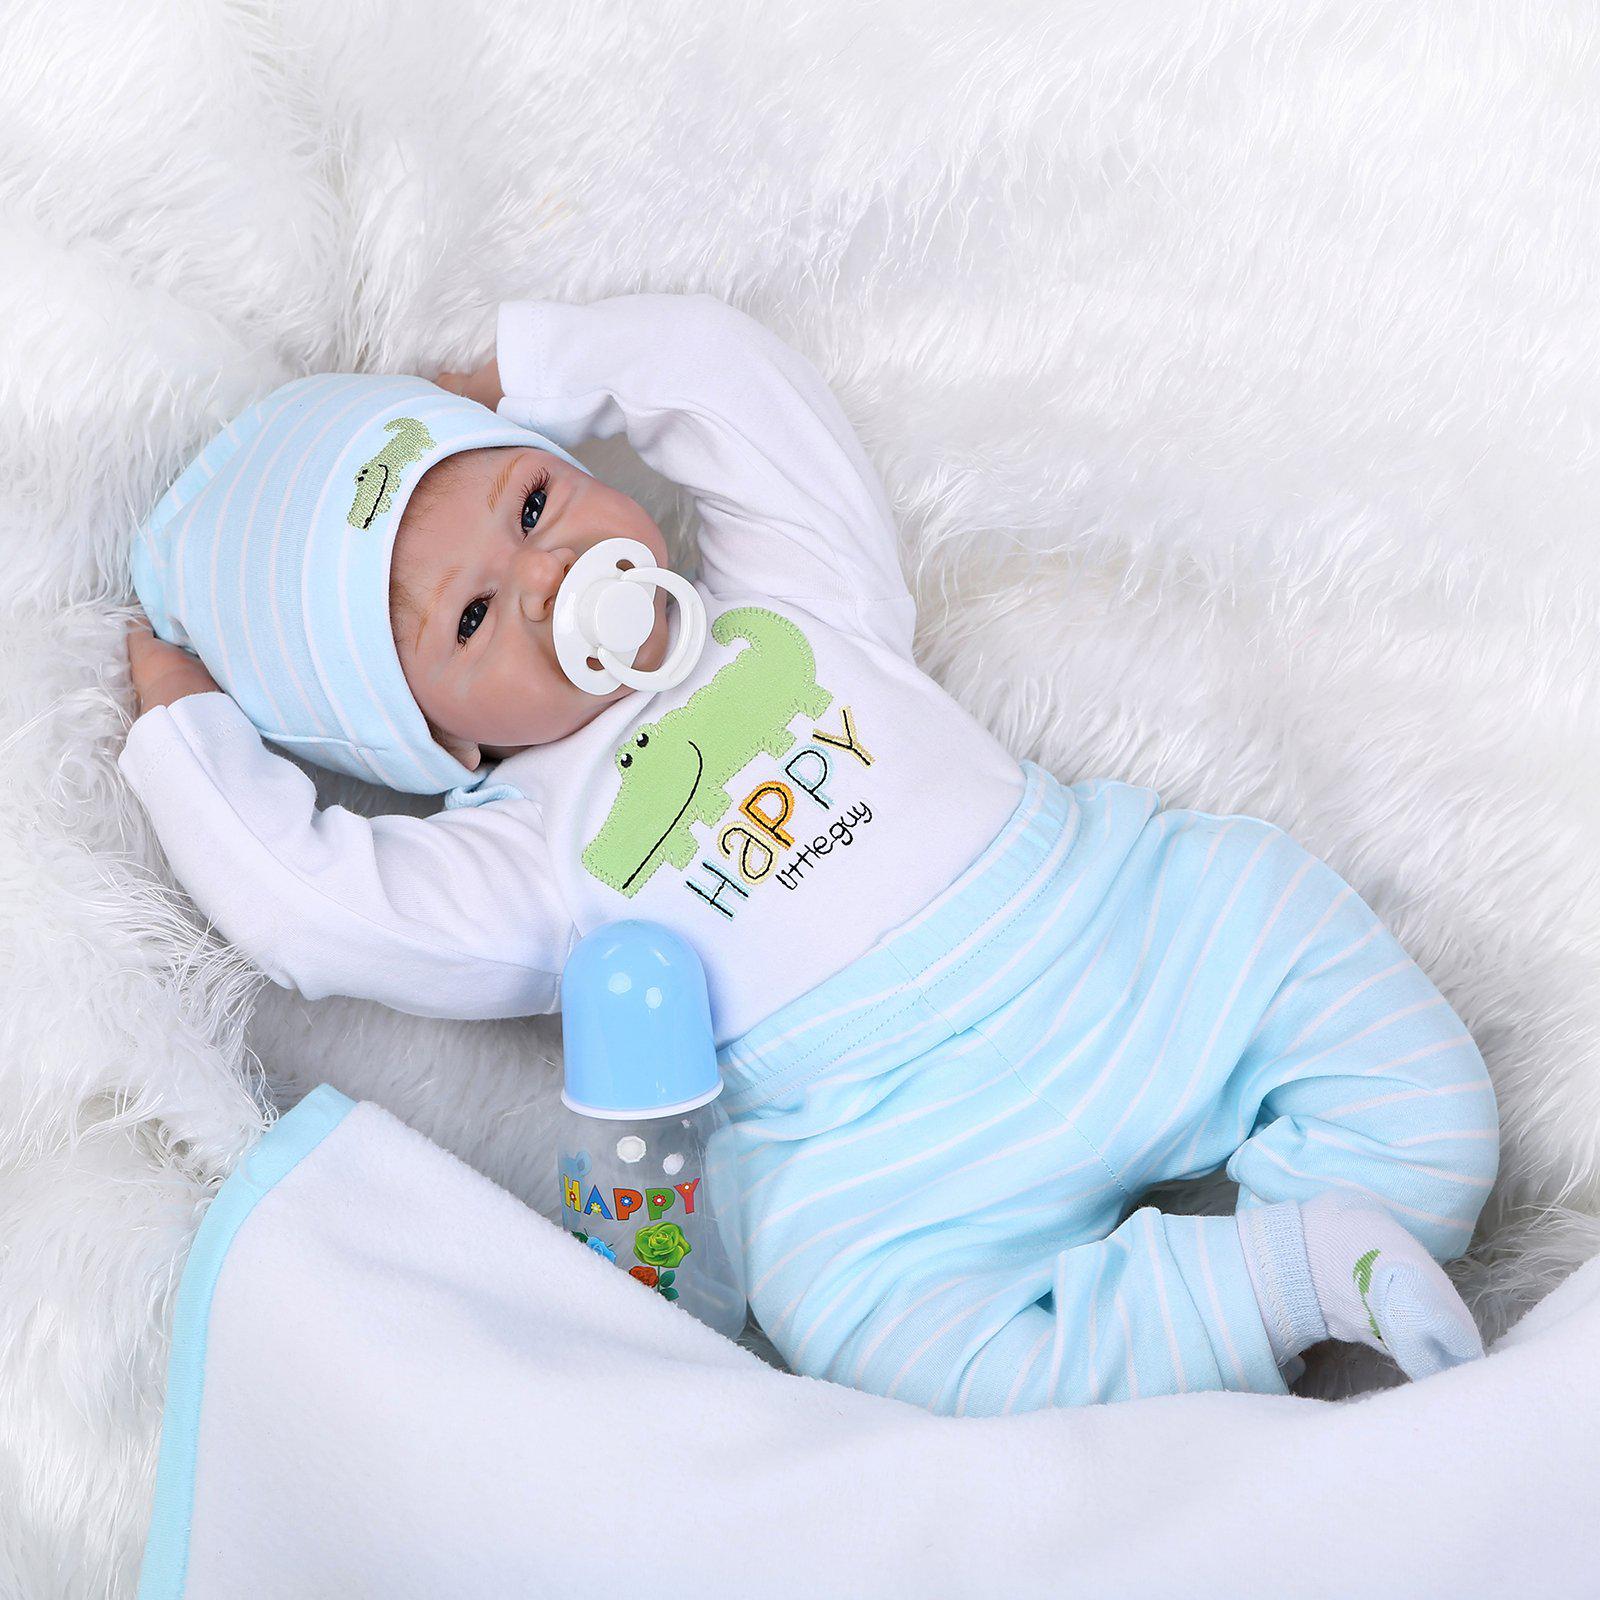 medylove reborn baby dolls' suits reborn baby clothing sets for 20"- 22" inches dolls reborn doll baby boy clothing light blu